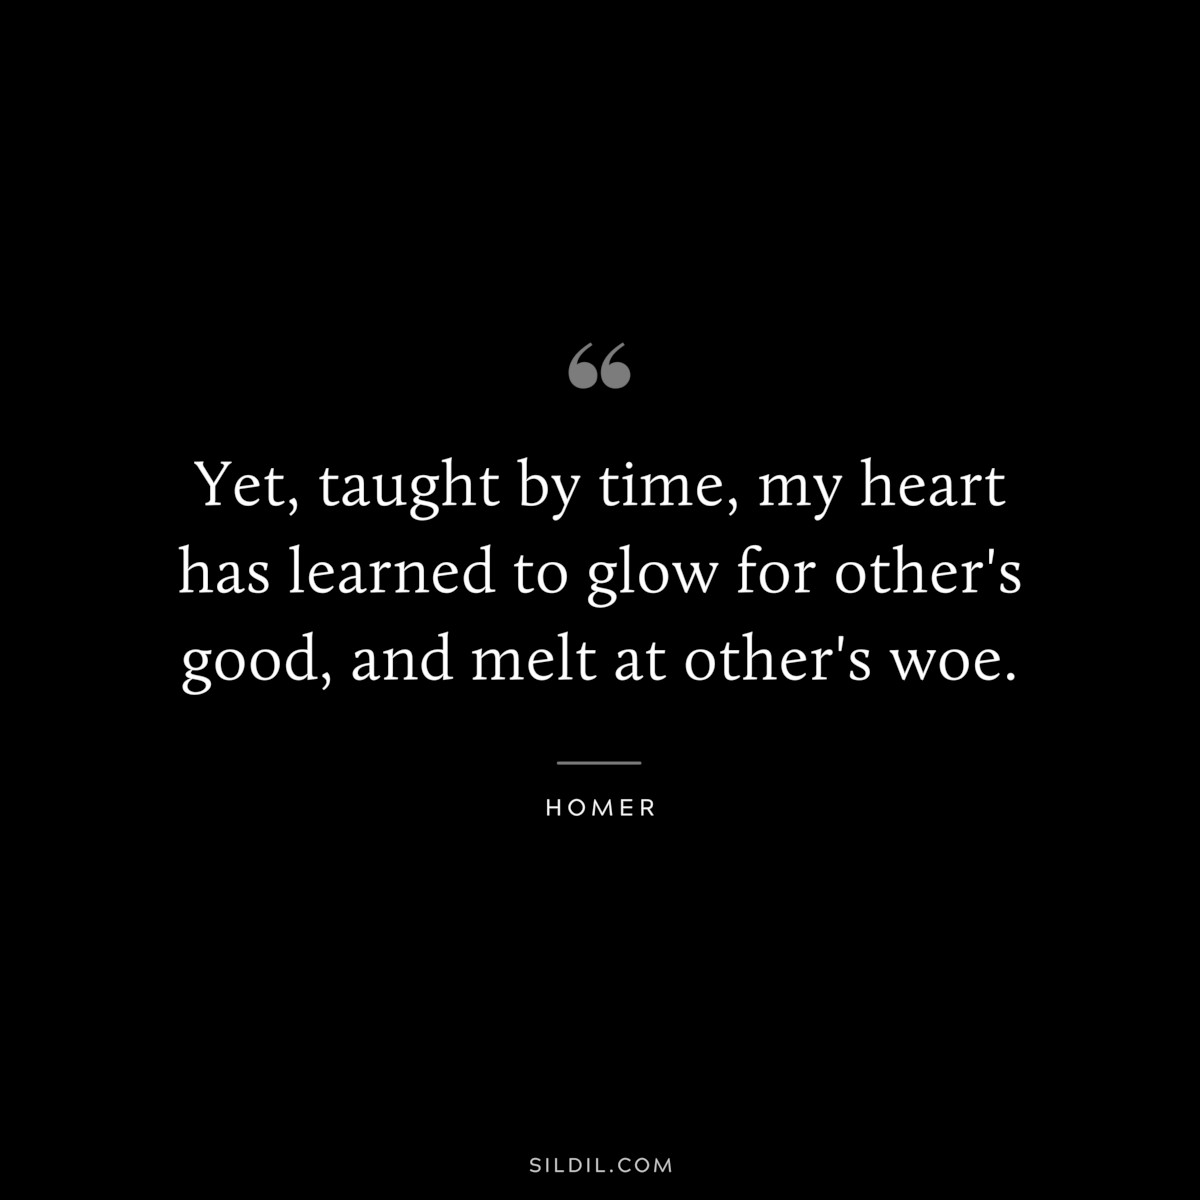 Yet, taught by time, my heart has learned to glow for other's good, and melt at other's woe. ― Homer